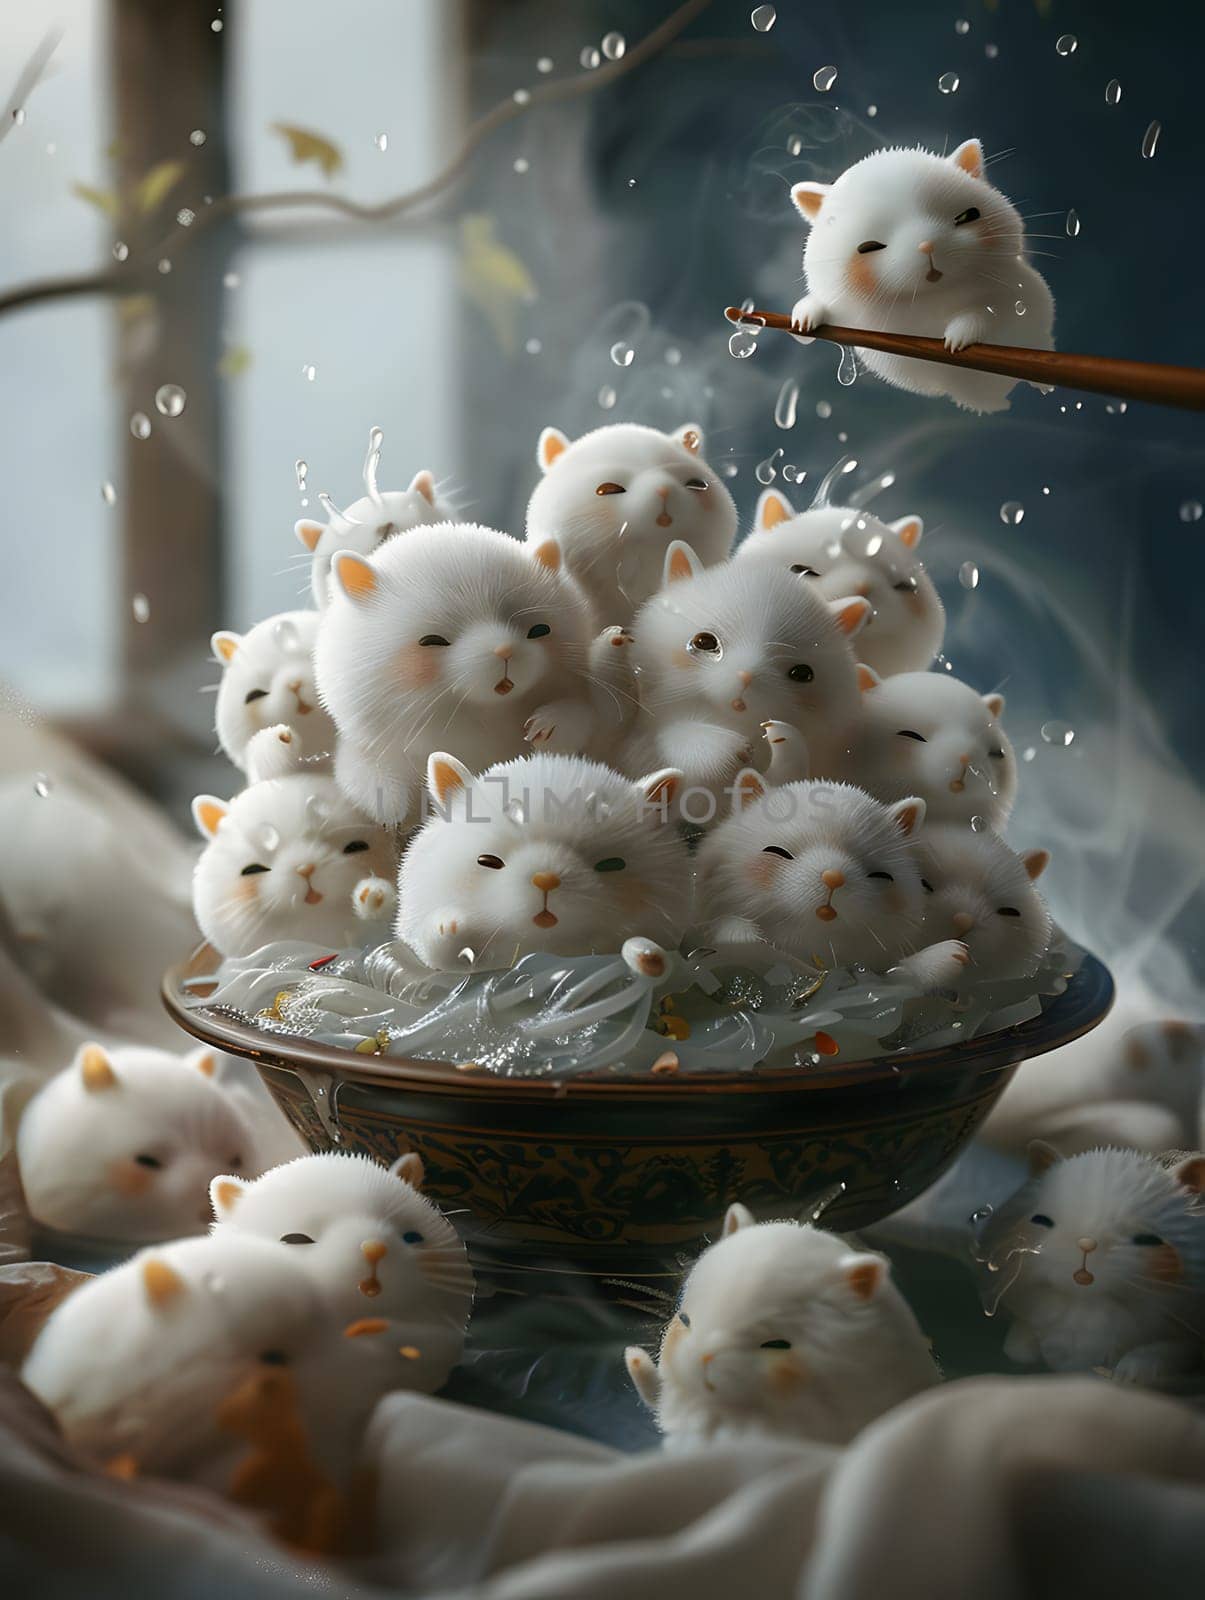 White fluffy toys float in glass dish of water, resembling a still life photo by Nadtochiy